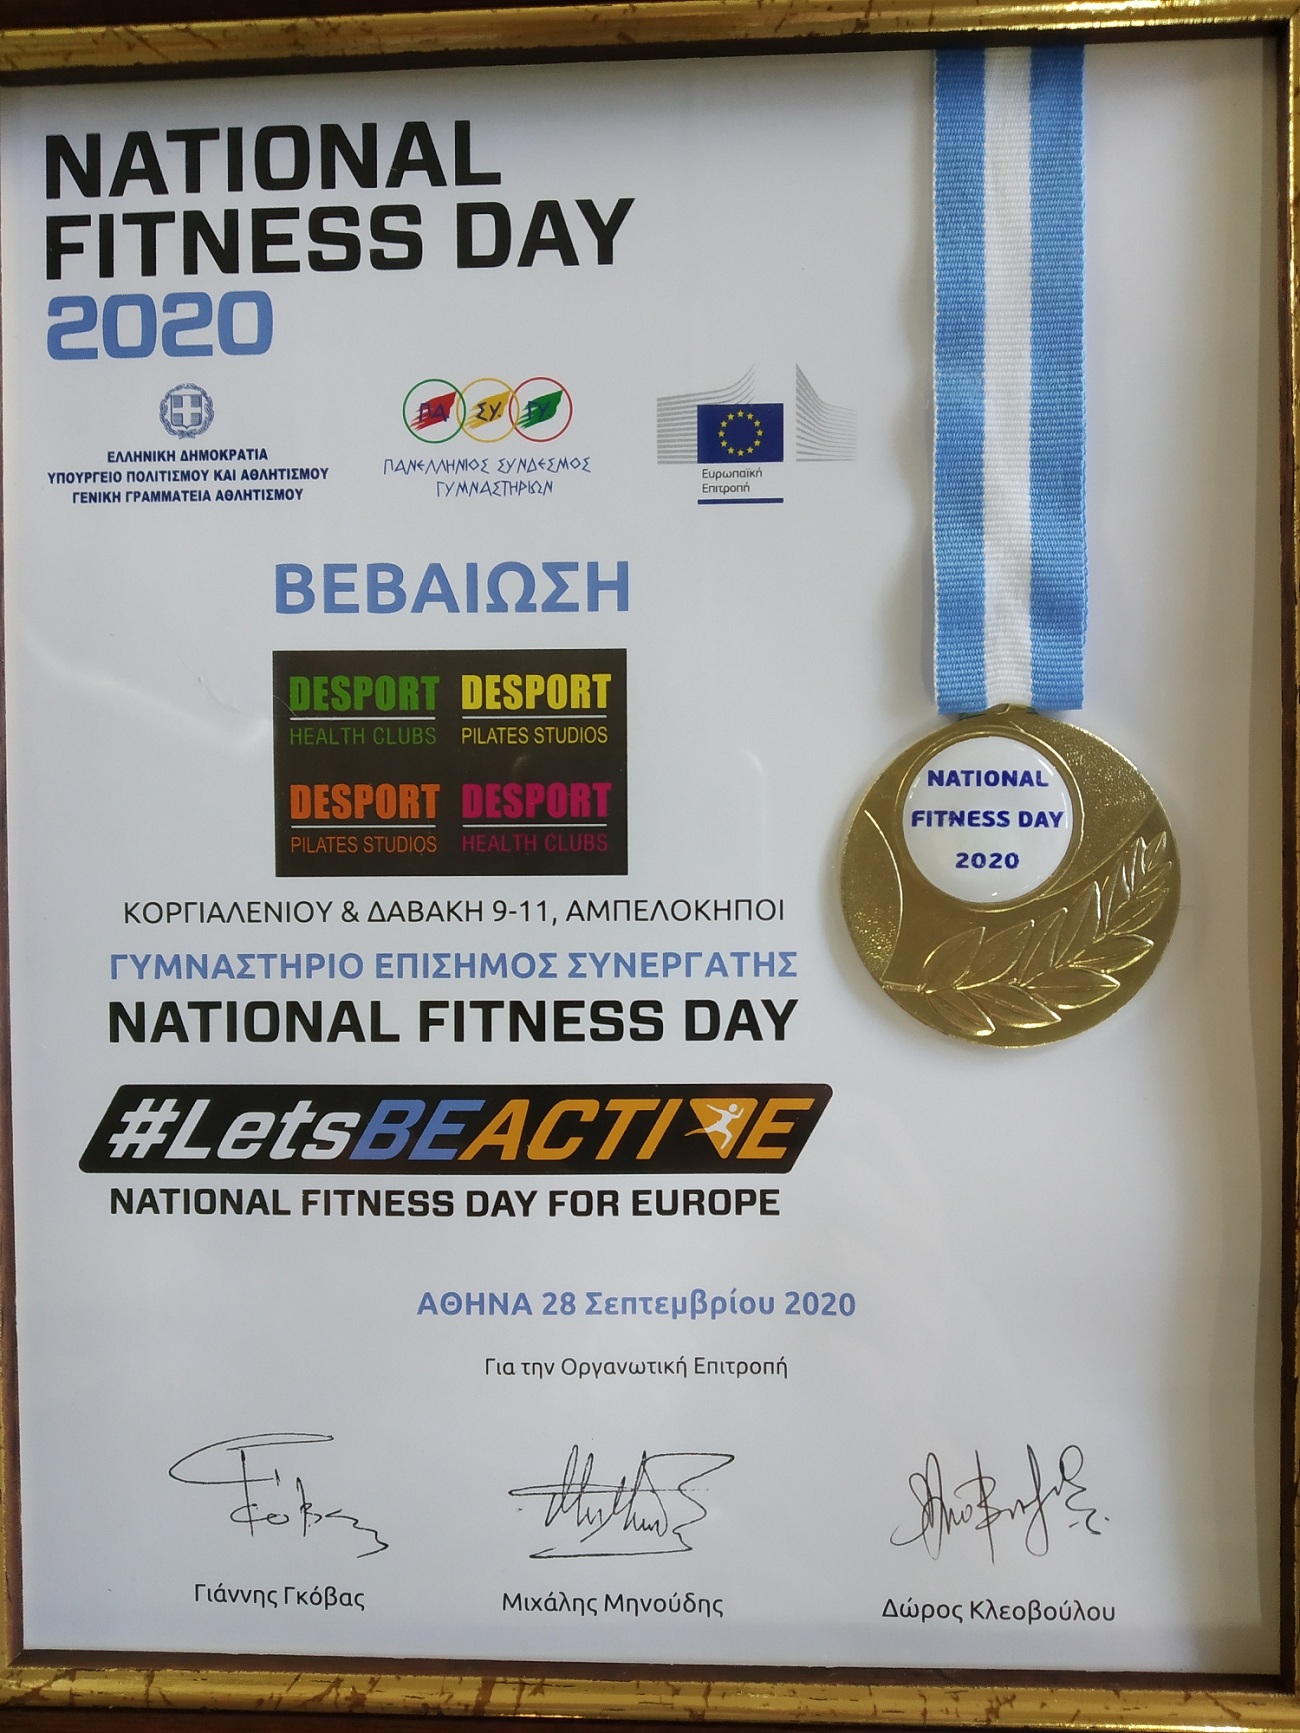 national fitness day